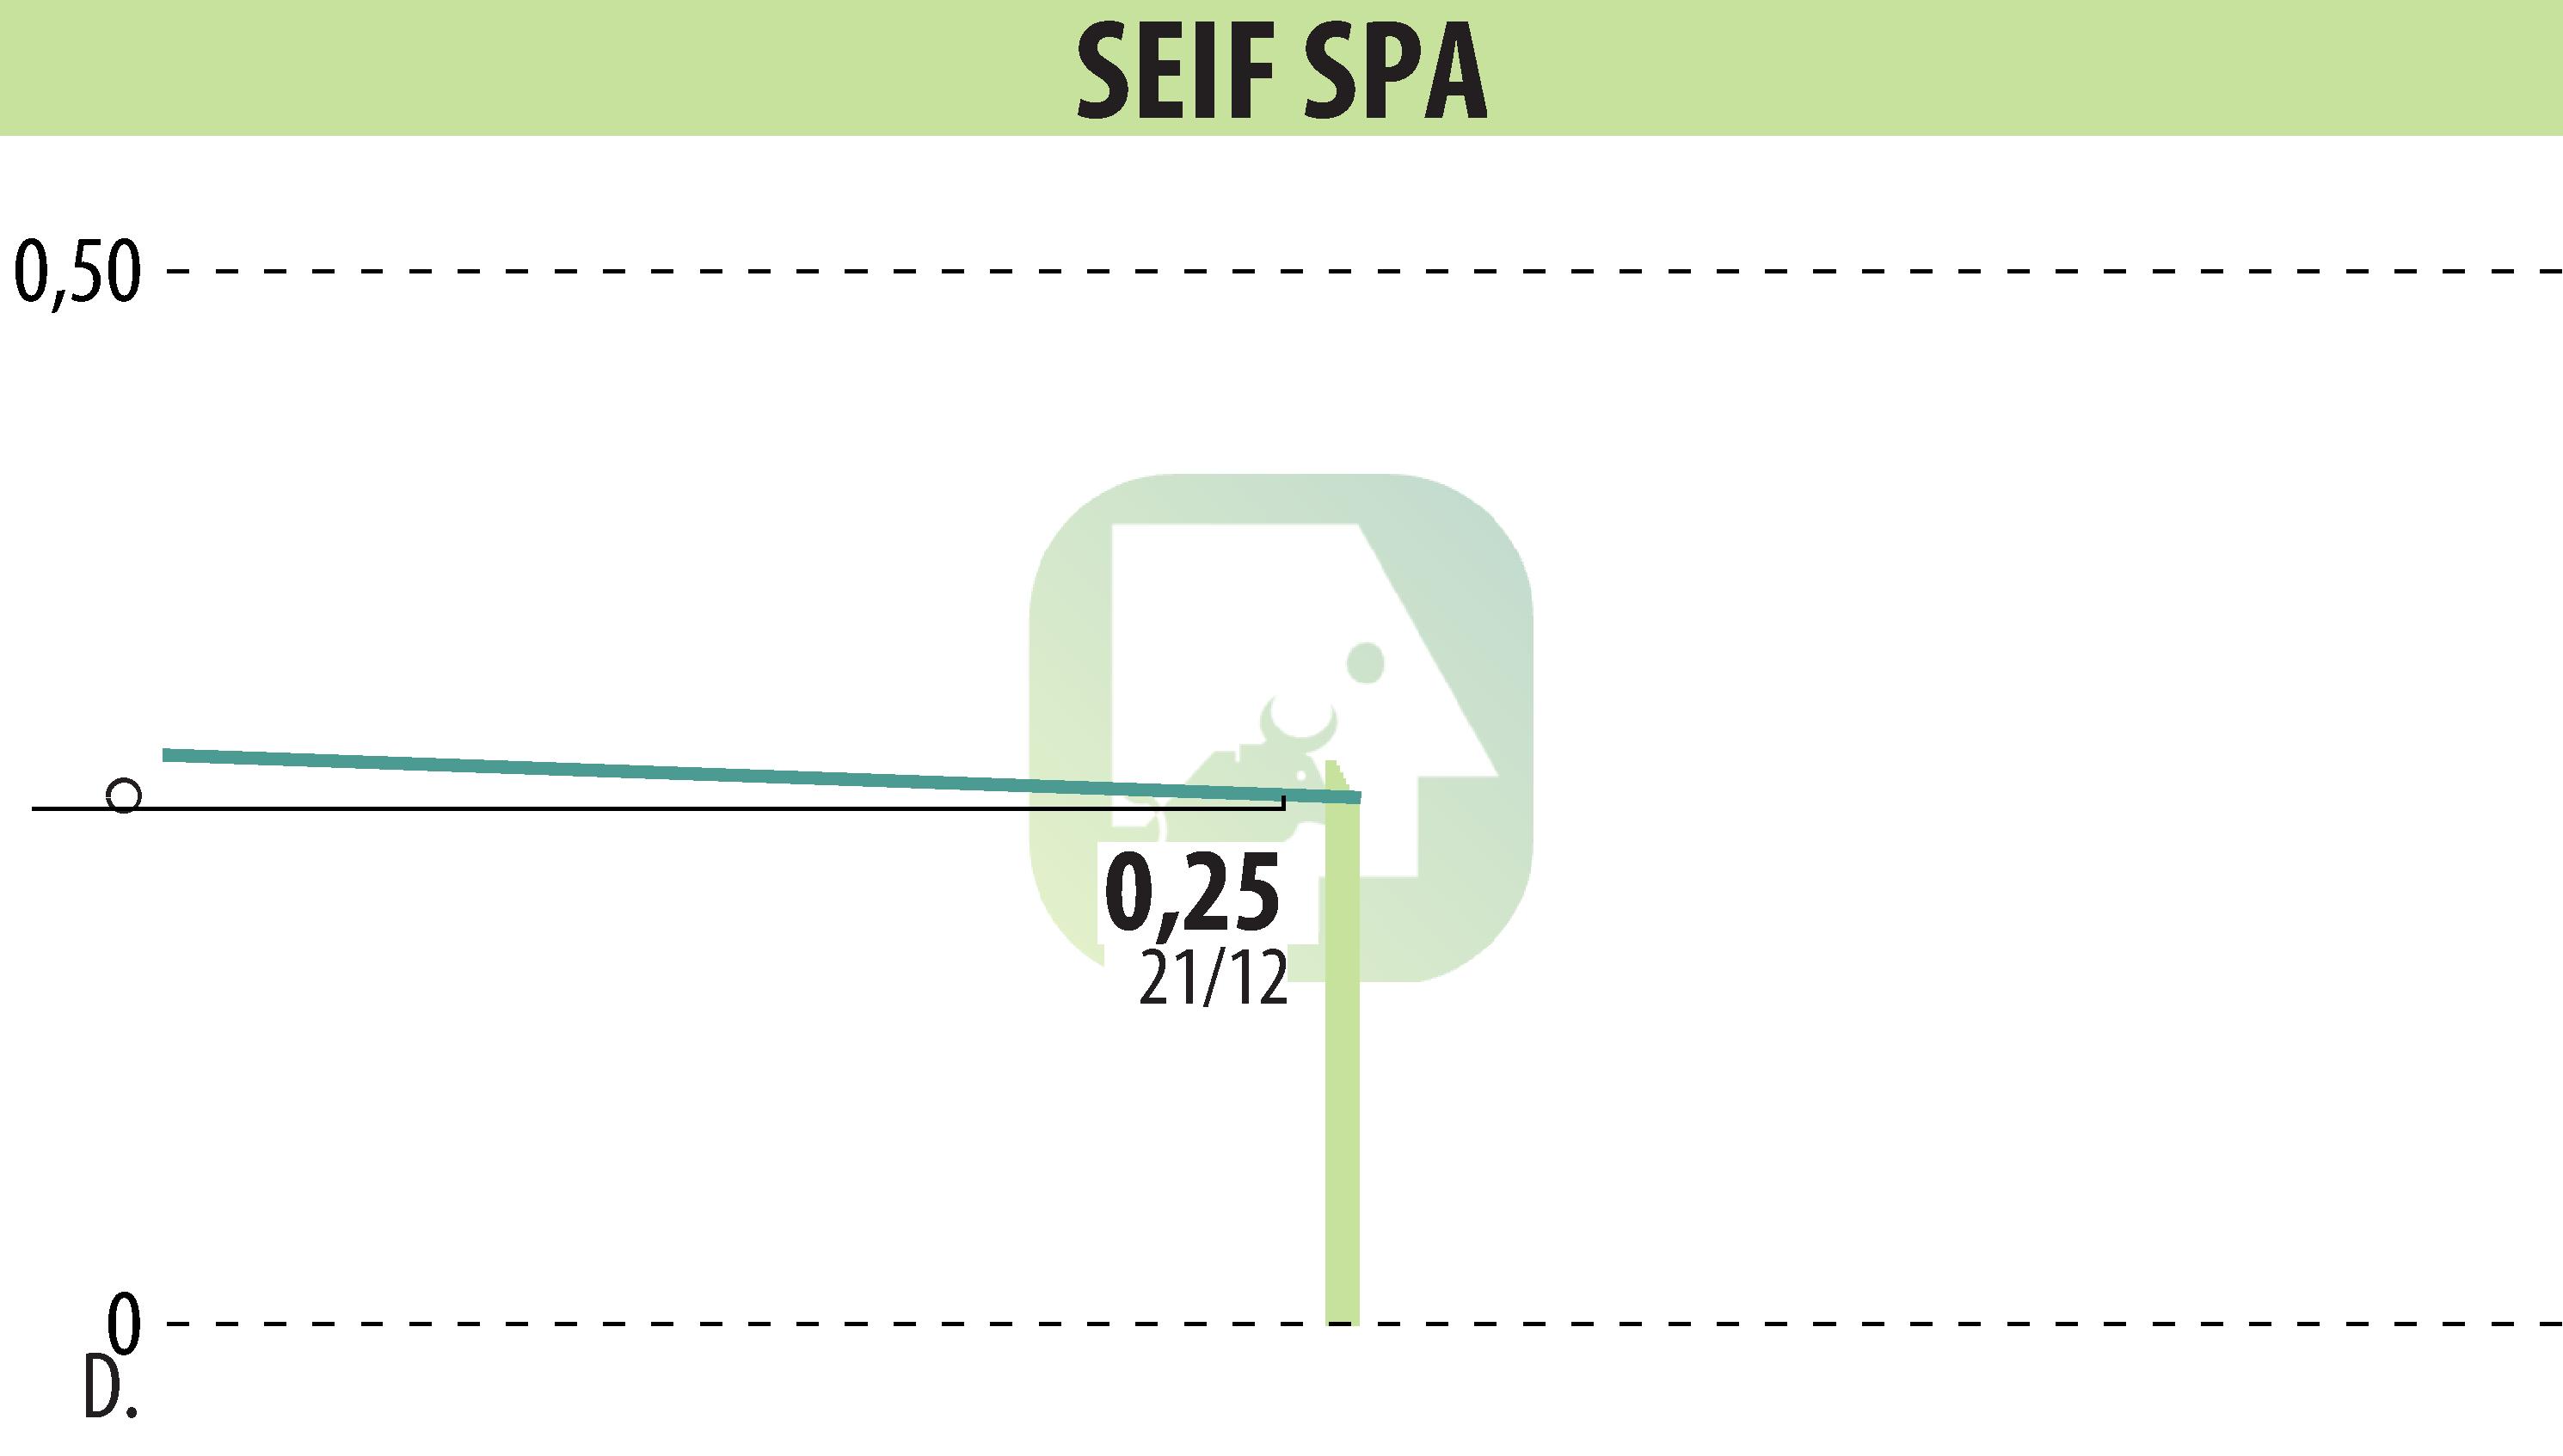 Stock price chart of SEIF SPA (EPA:ALSEI) showing fluctuations.